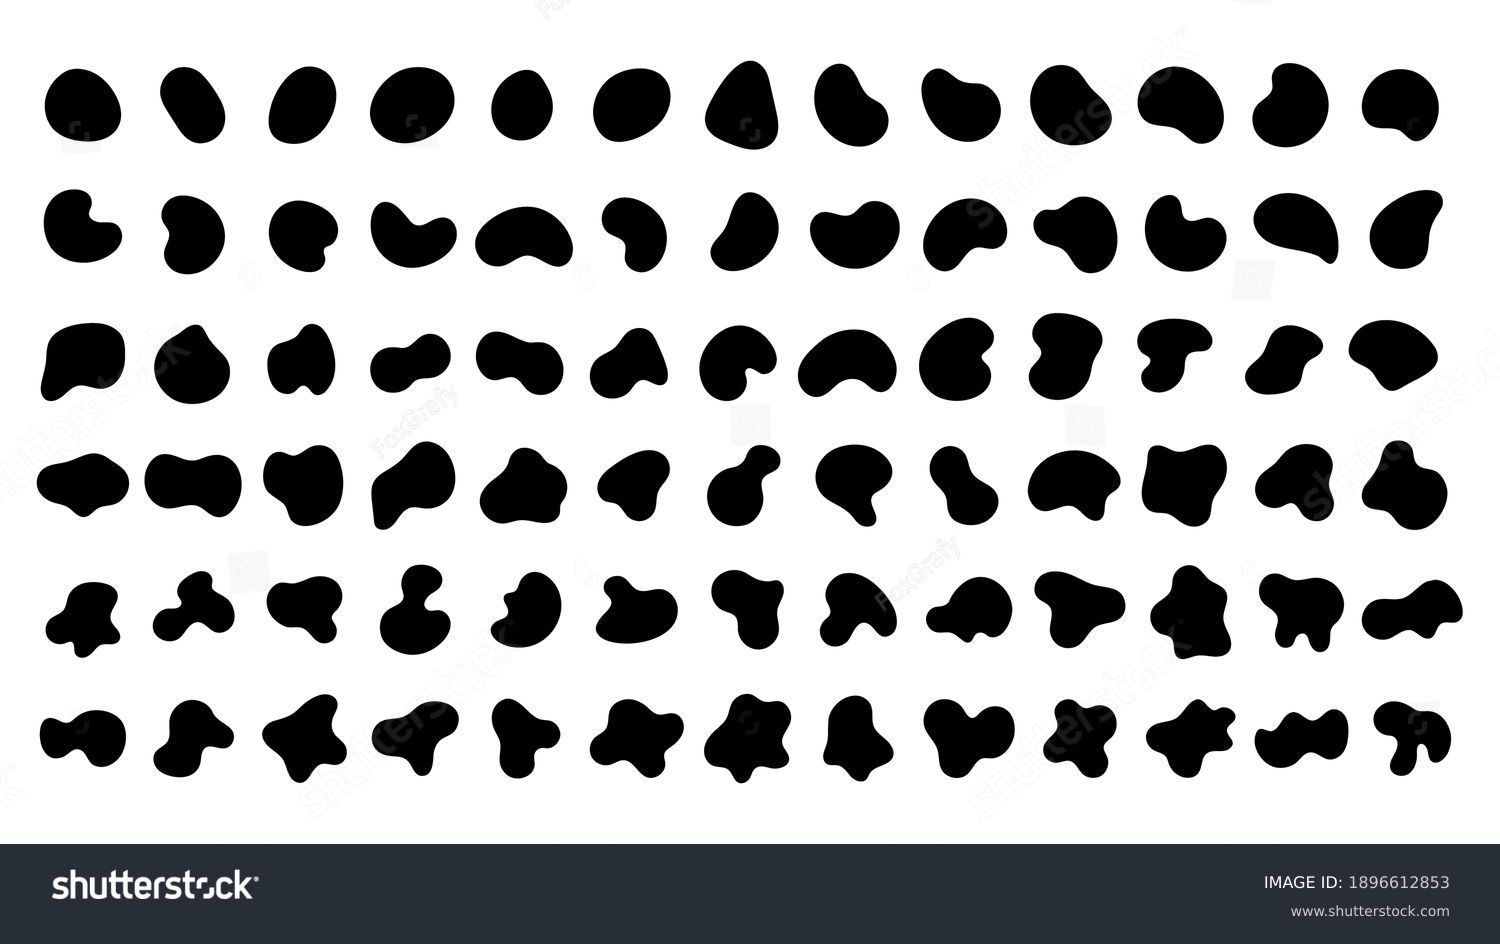 Vector liquid shadows random shapes. Black cube drops simple shapes. vector illustration isolate on white background. #1896612853